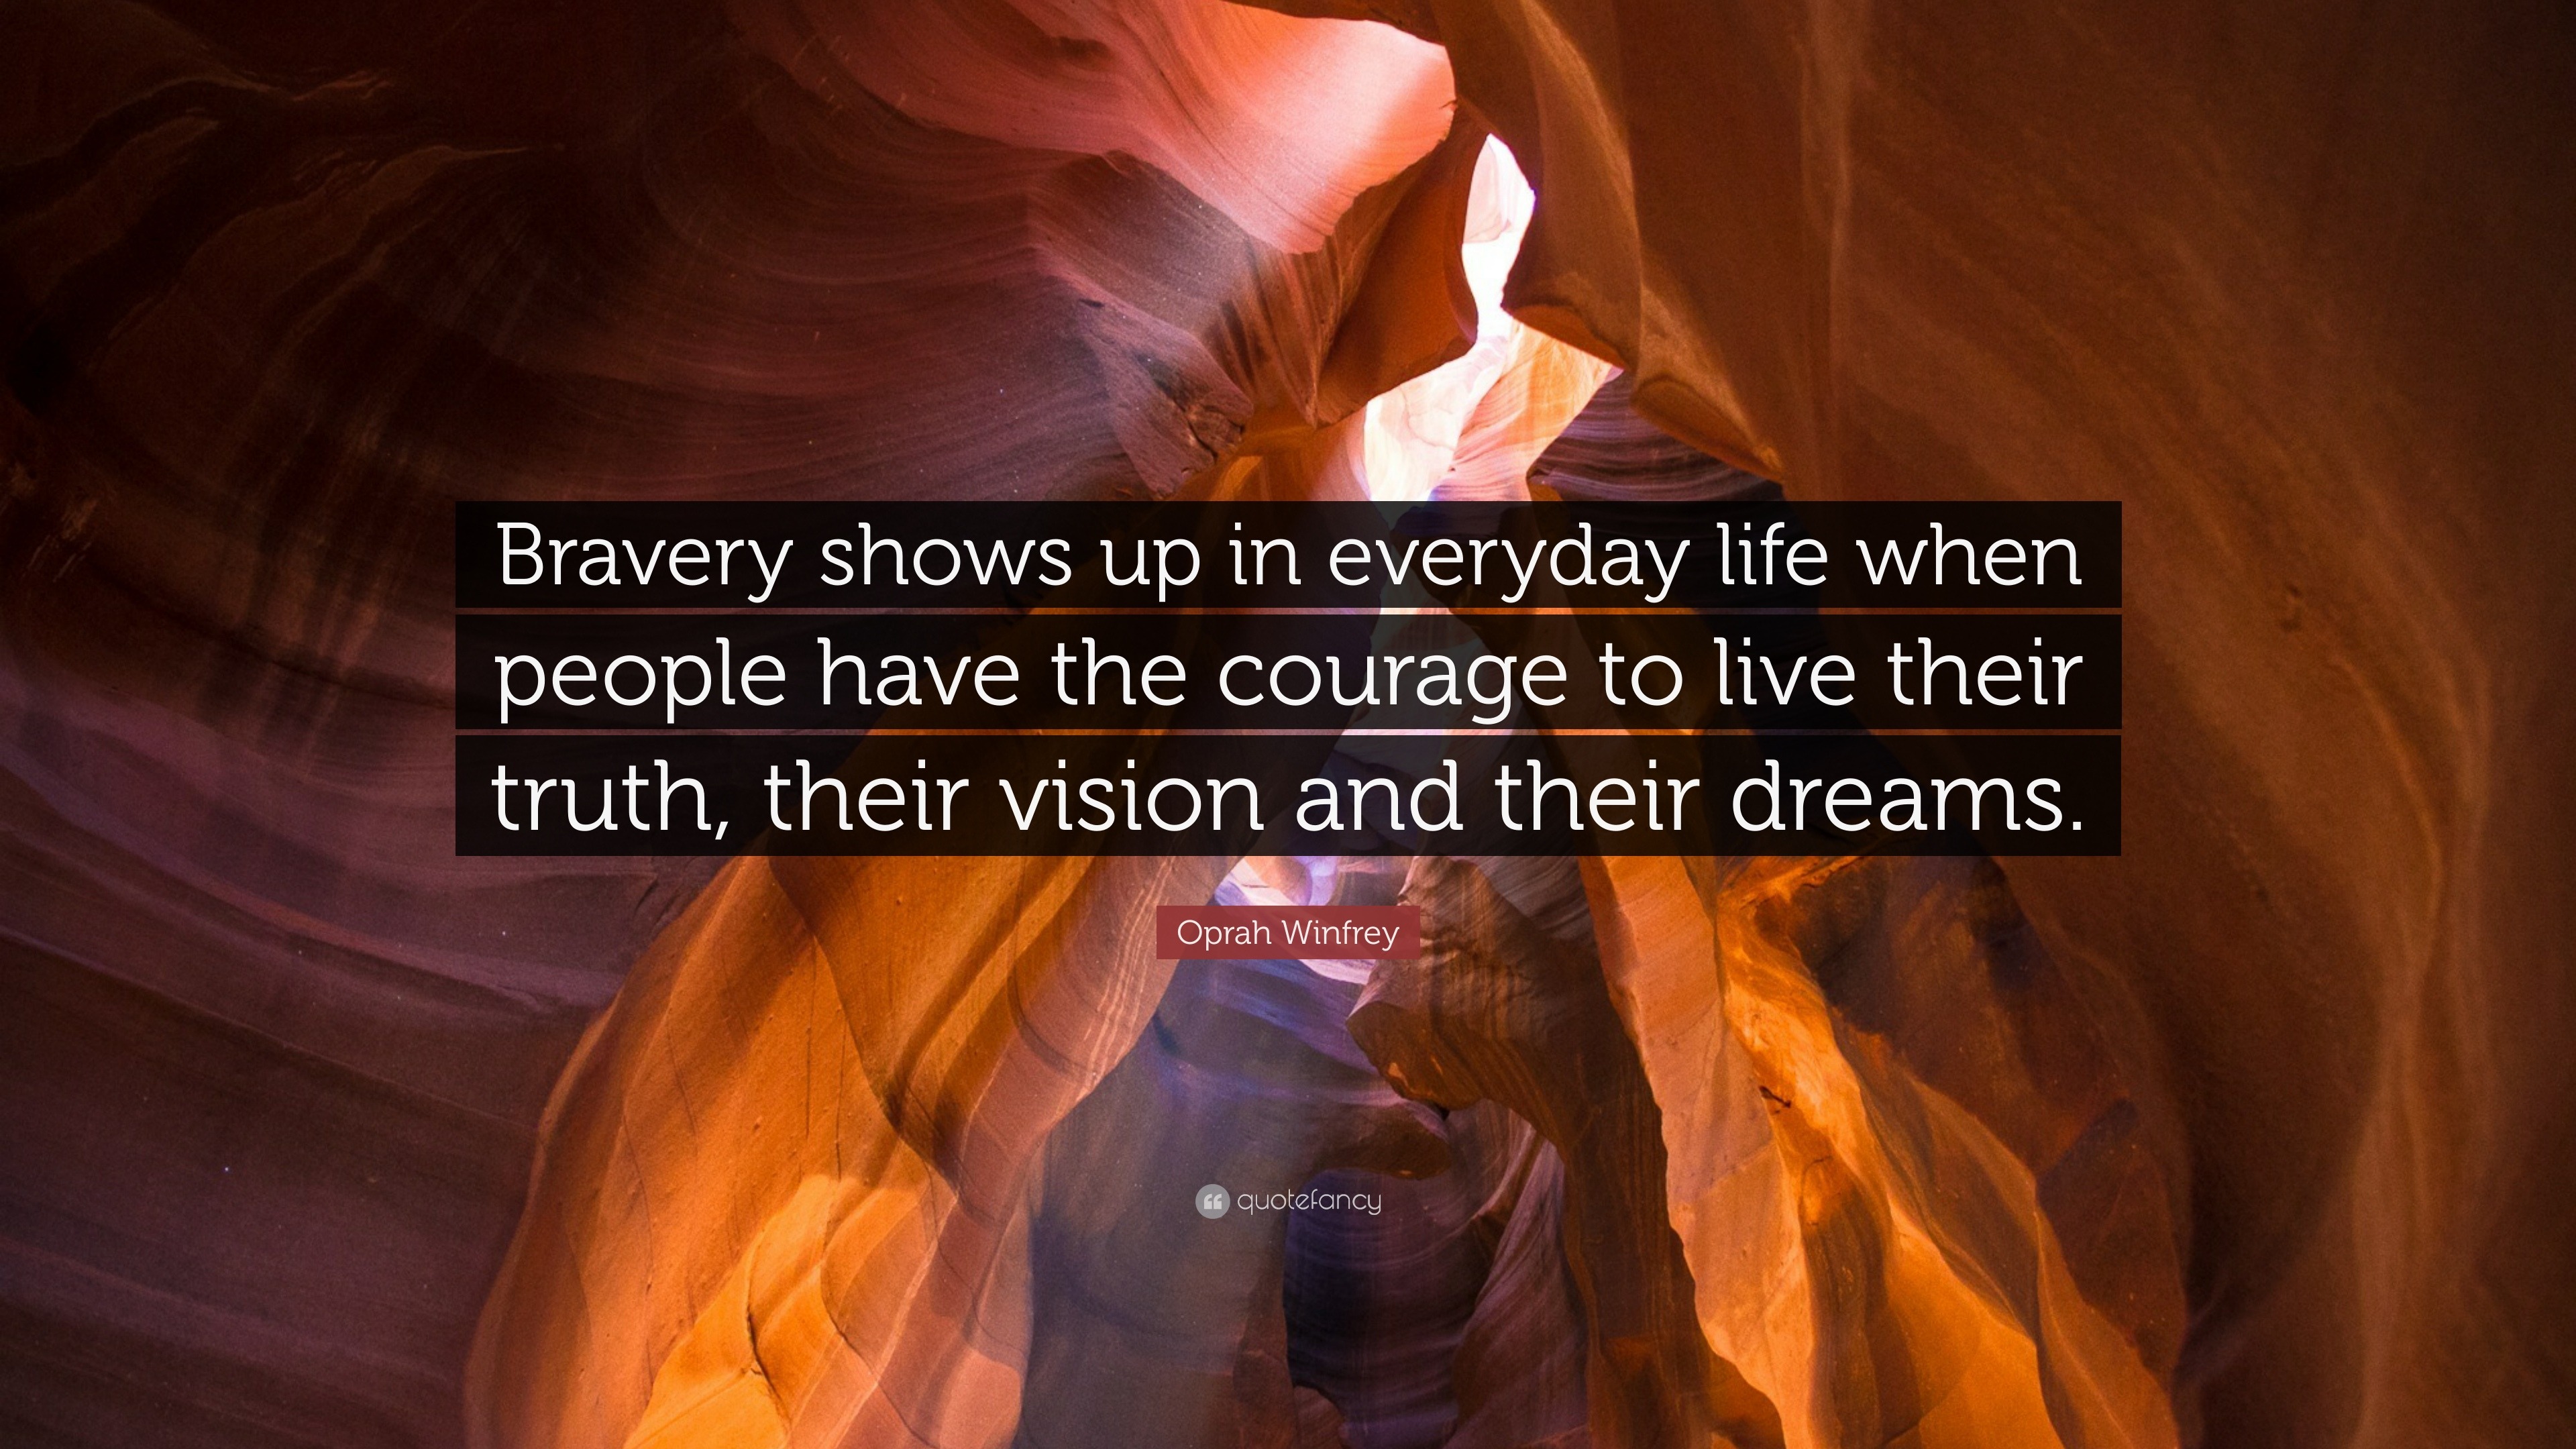 Oprah Winfrey Quote: “Bravery shows up in everyday life when